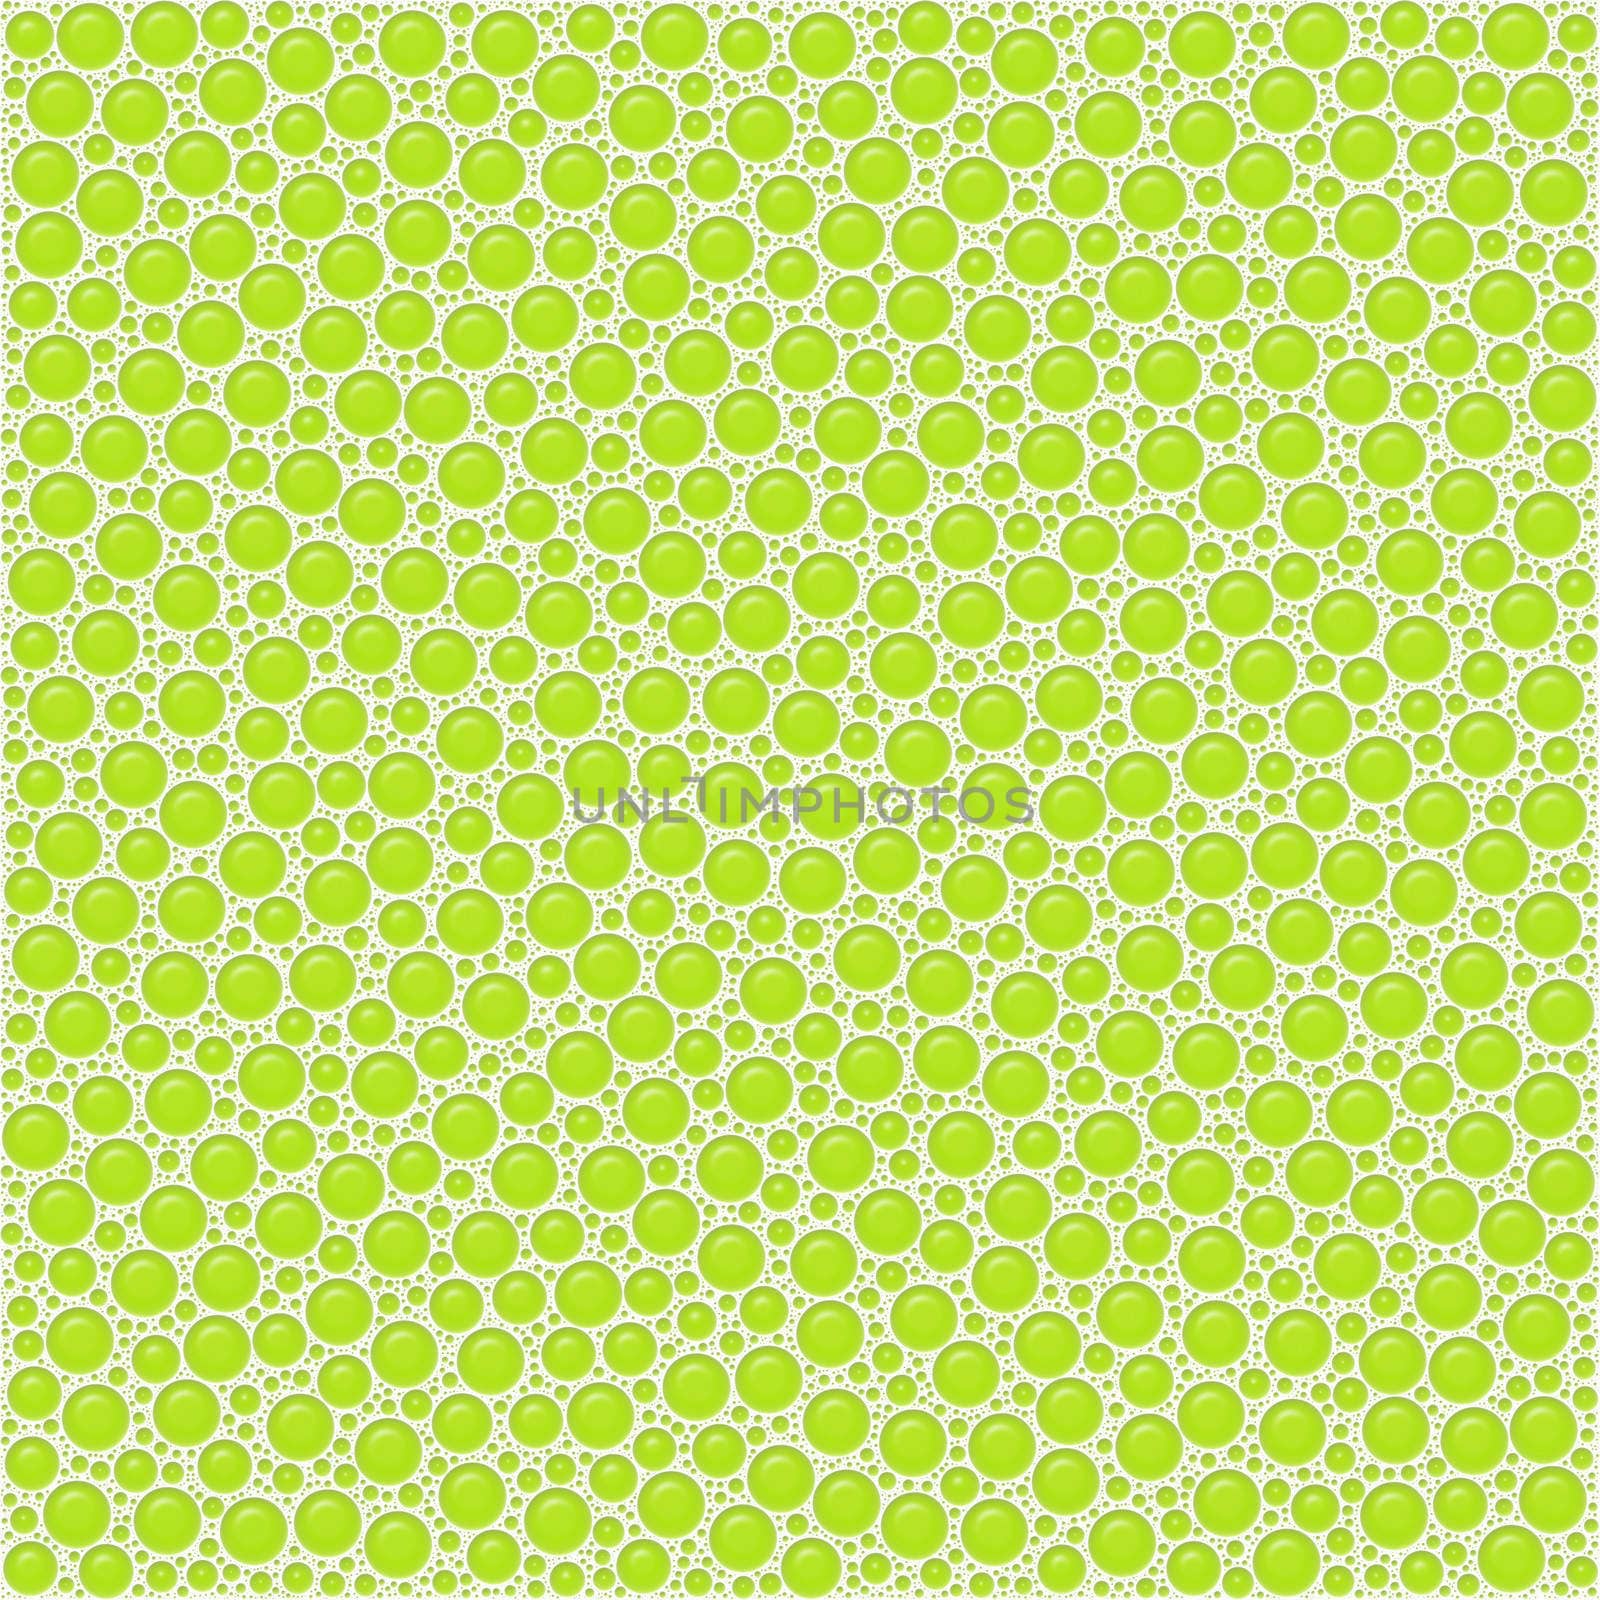 Bubbles, green abstract background